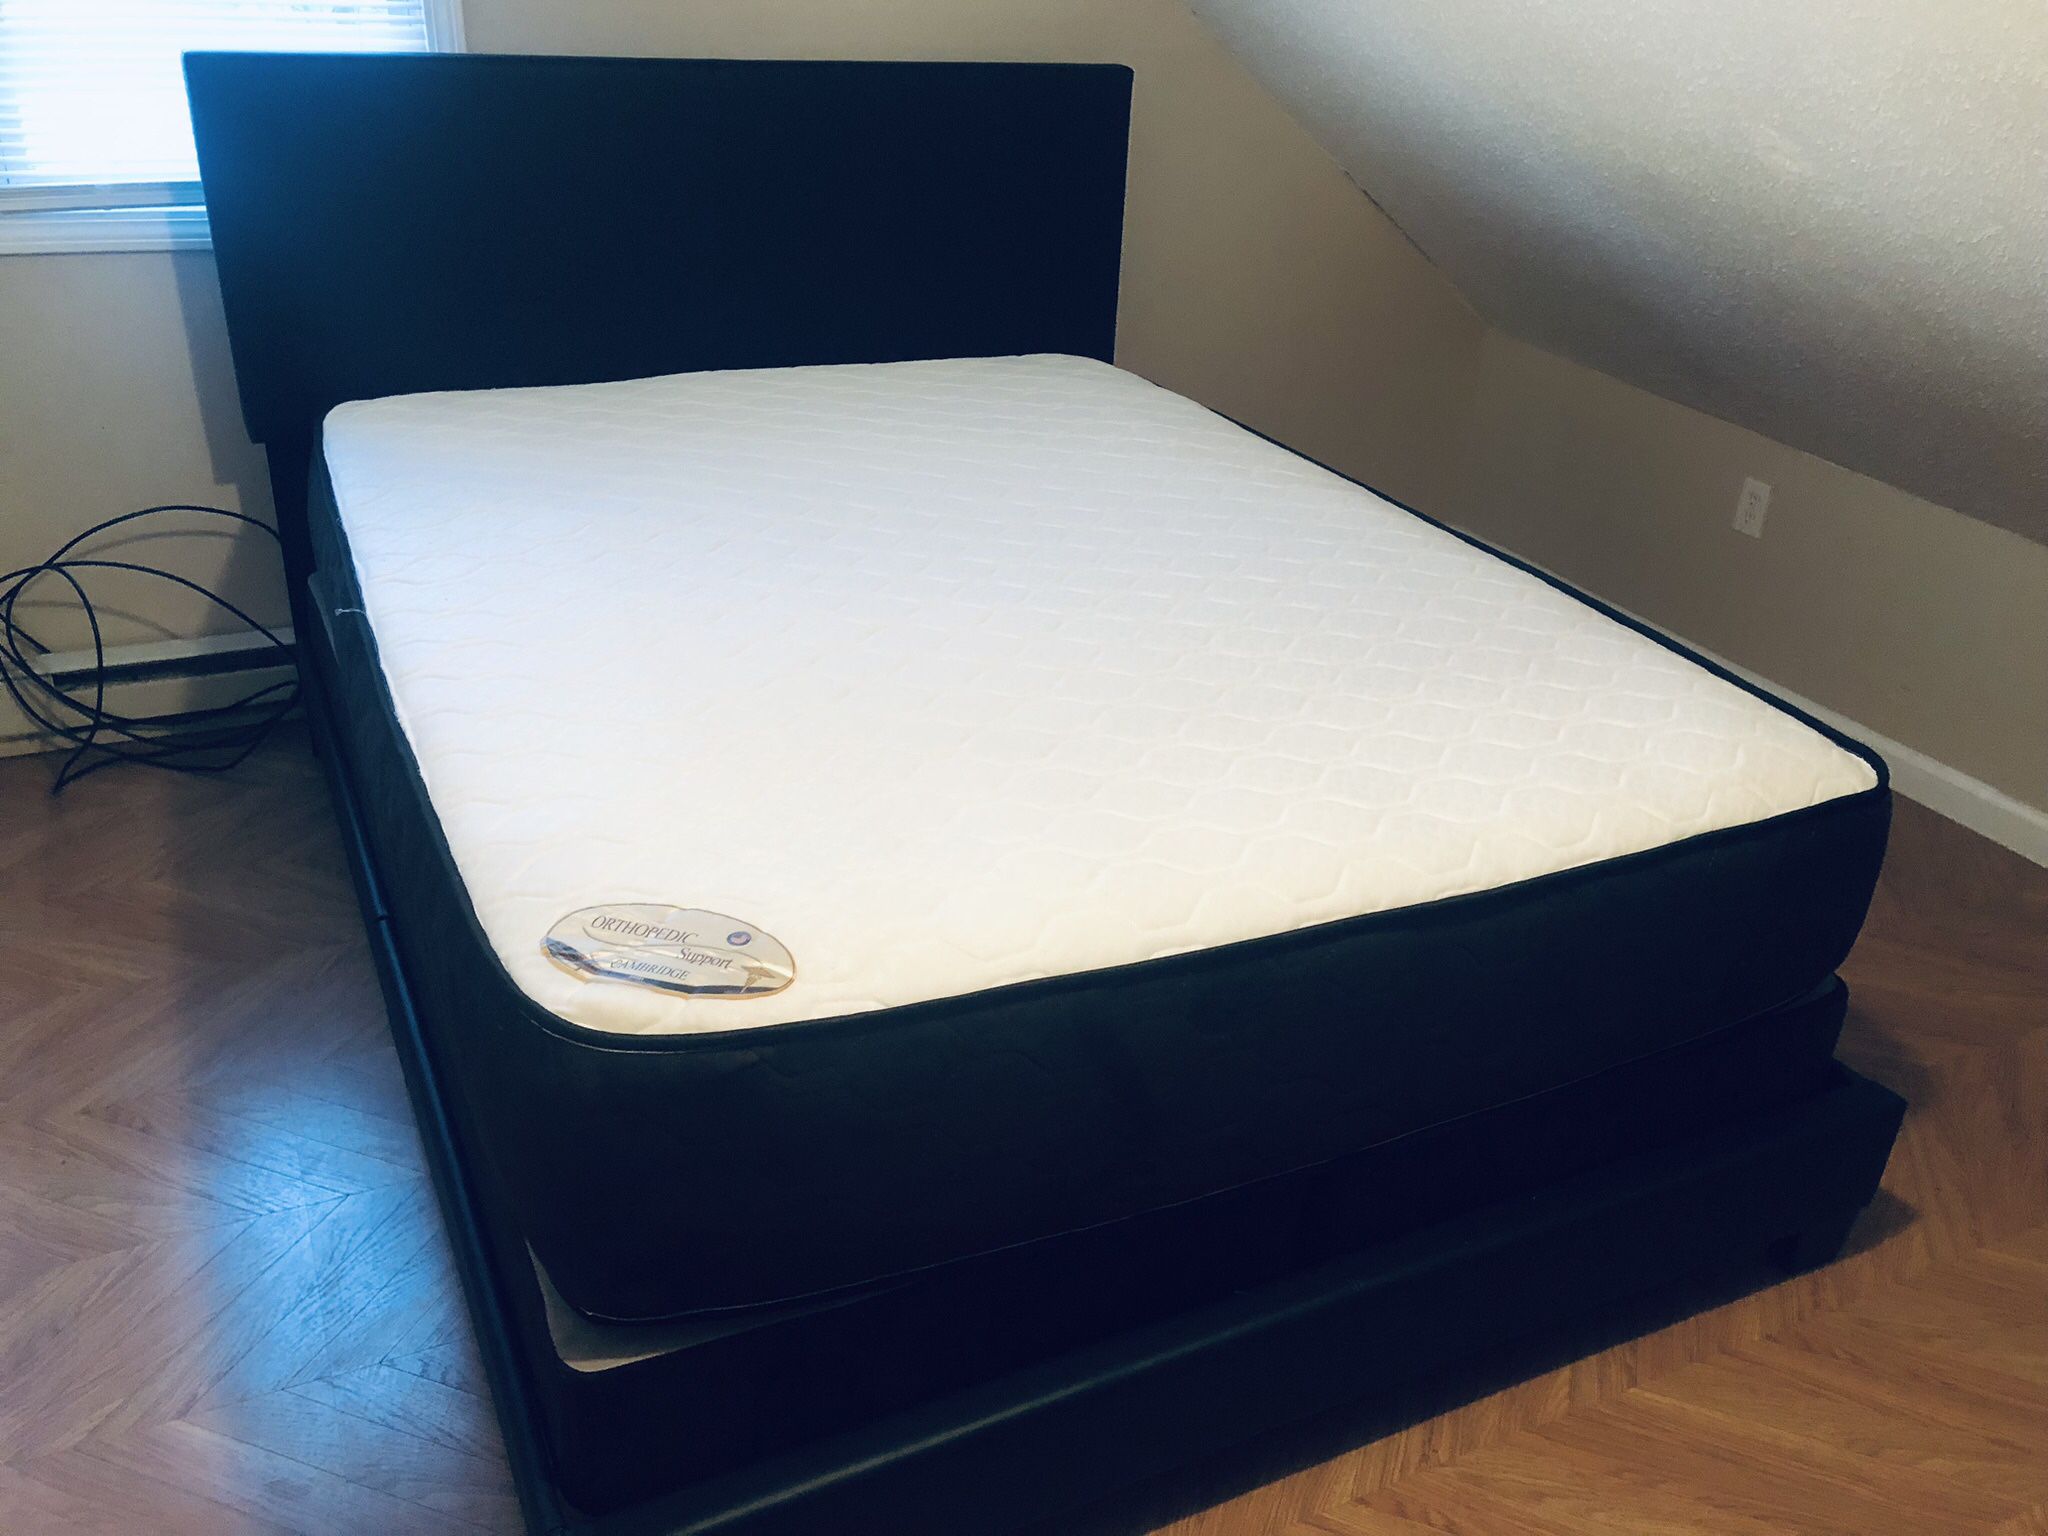 Queen size mattres Foam 11”thick+Regular box spring+Bed frame Brand new. We Finance we deliver